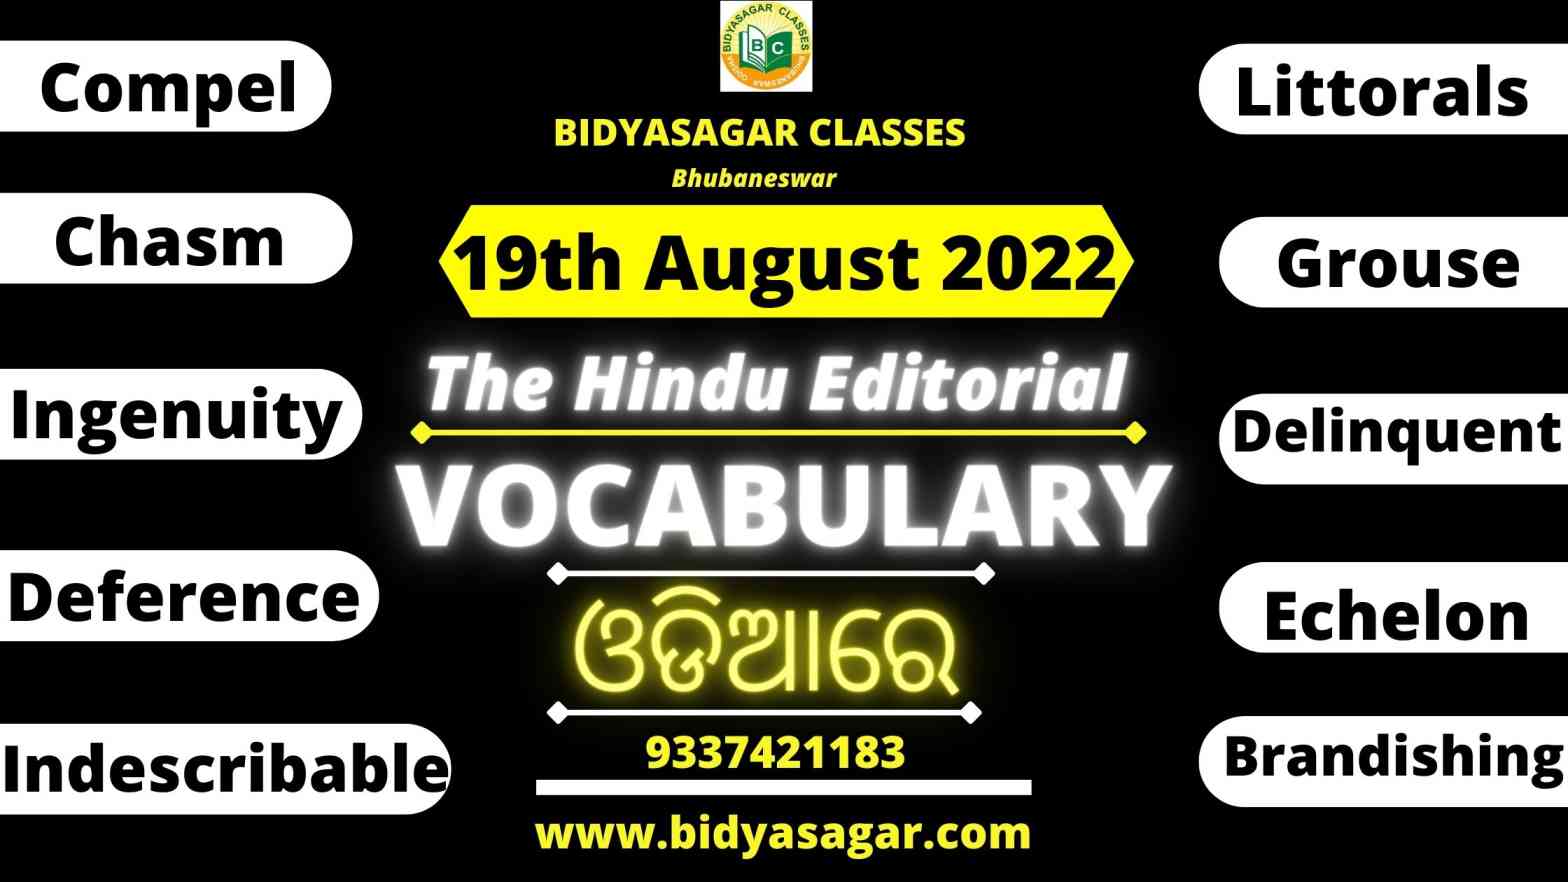 The Hindu Editorial Vocabulary of 19th August 2022